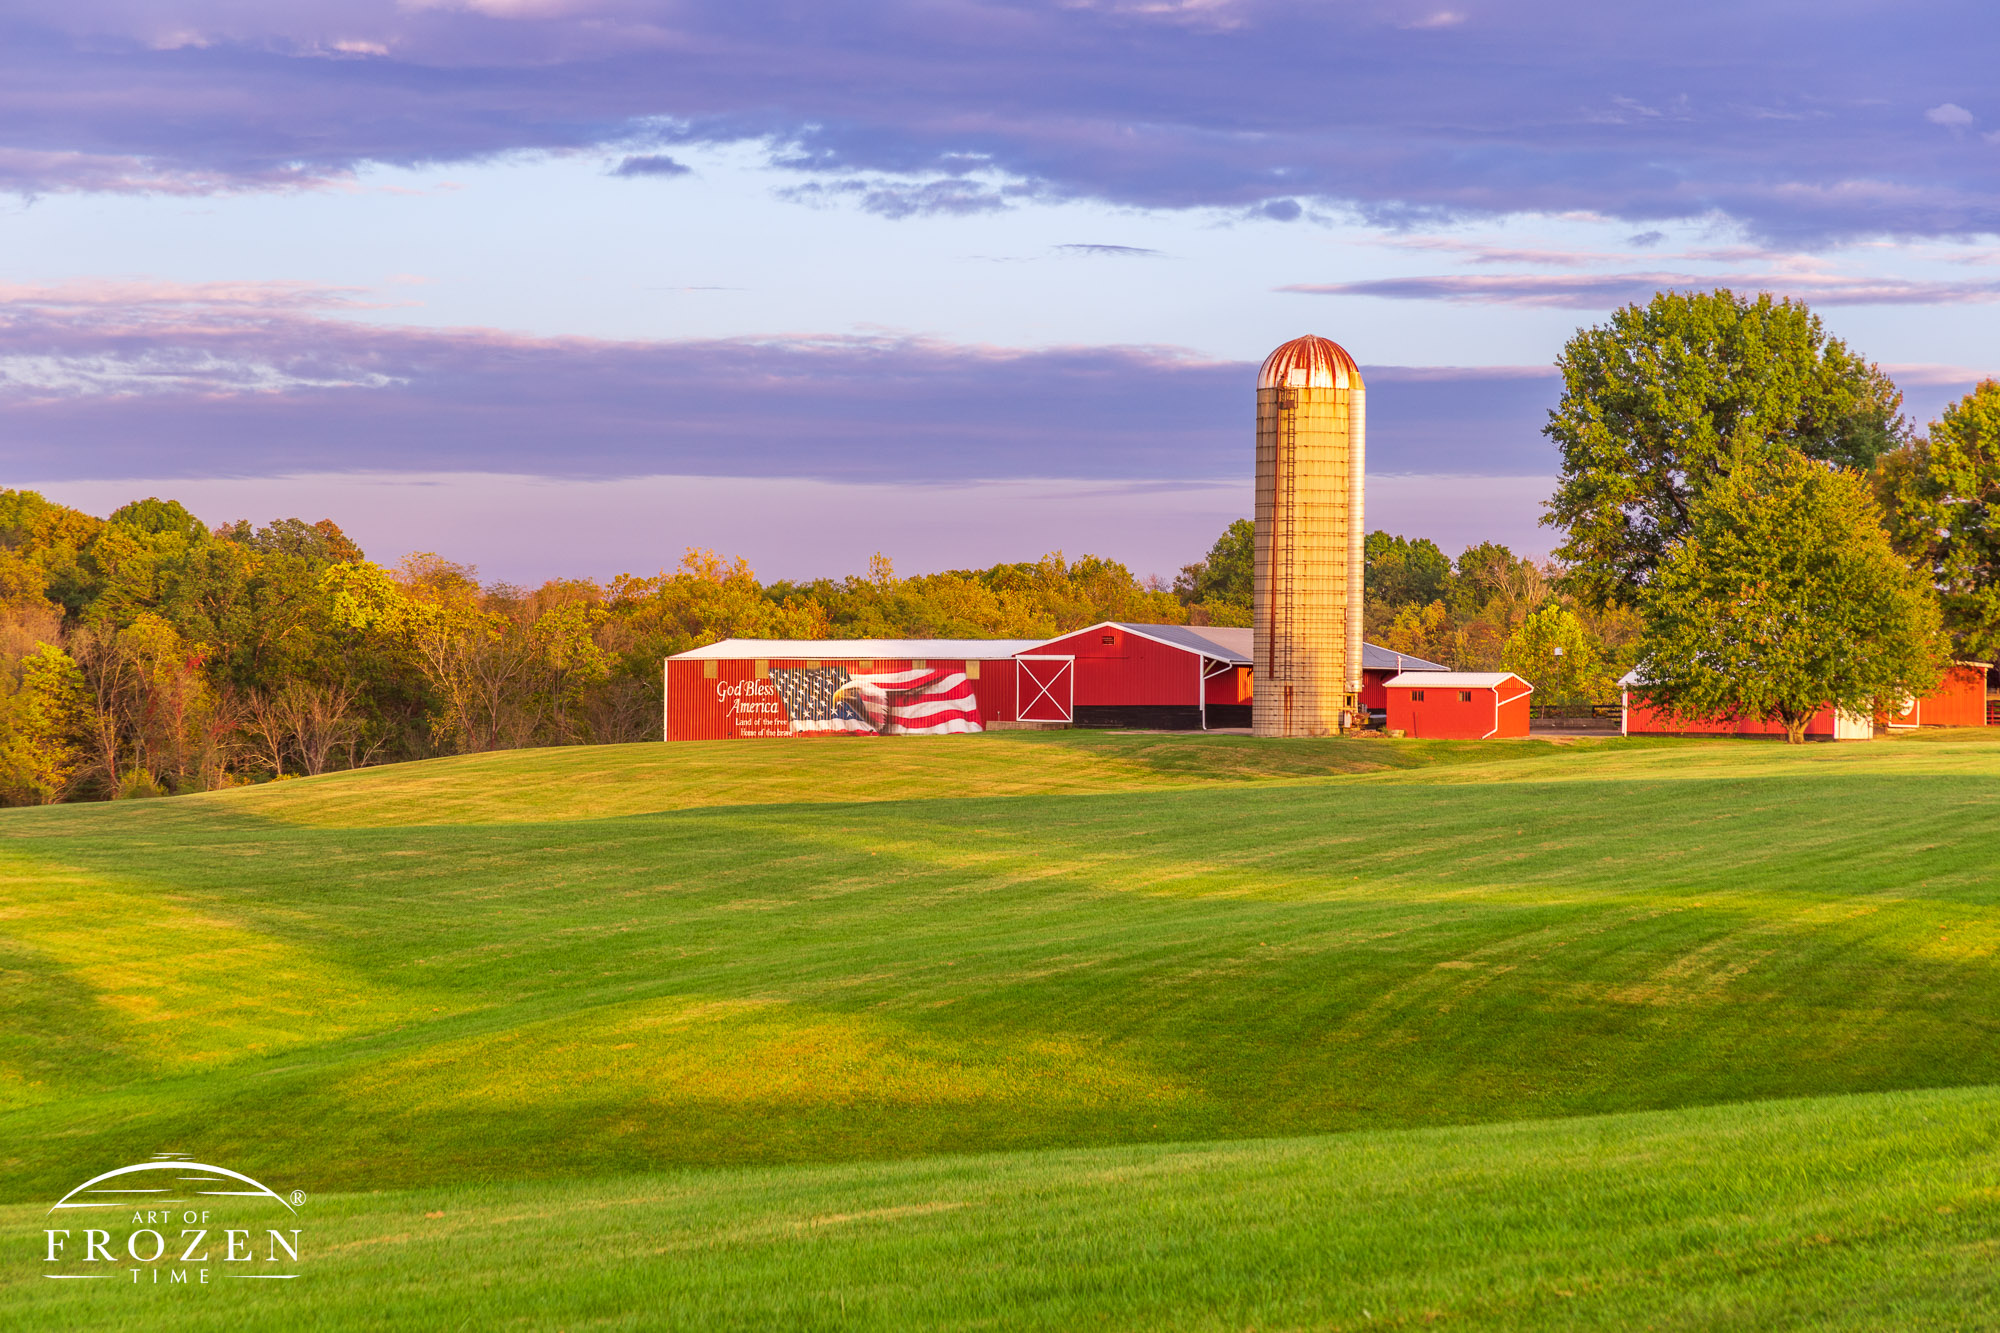 An evening view of an Ohio farm surrounded by rolling grass covered hills where every building is red with white time and one pole barn expresses the family’s patriotism